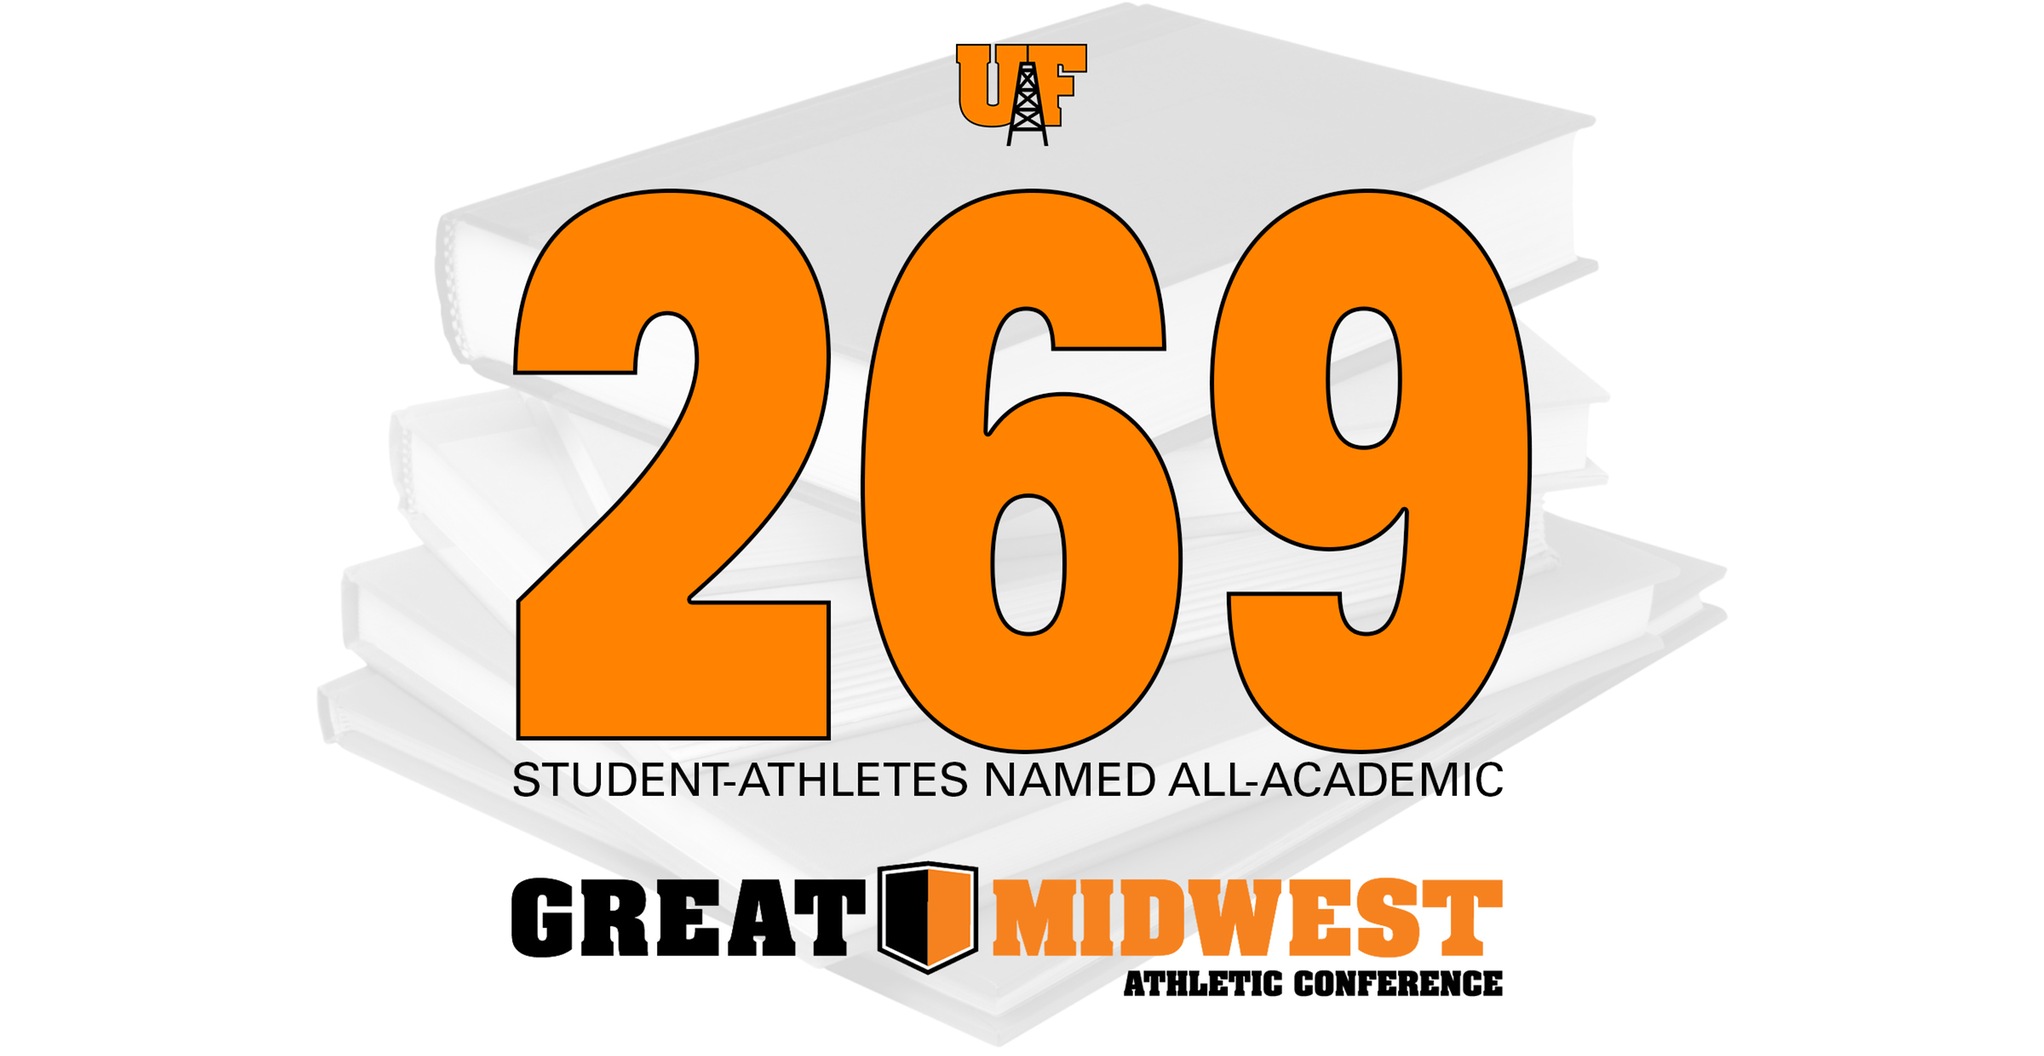 Oilers Lead G-MAC With 269 All-Academic Athletes